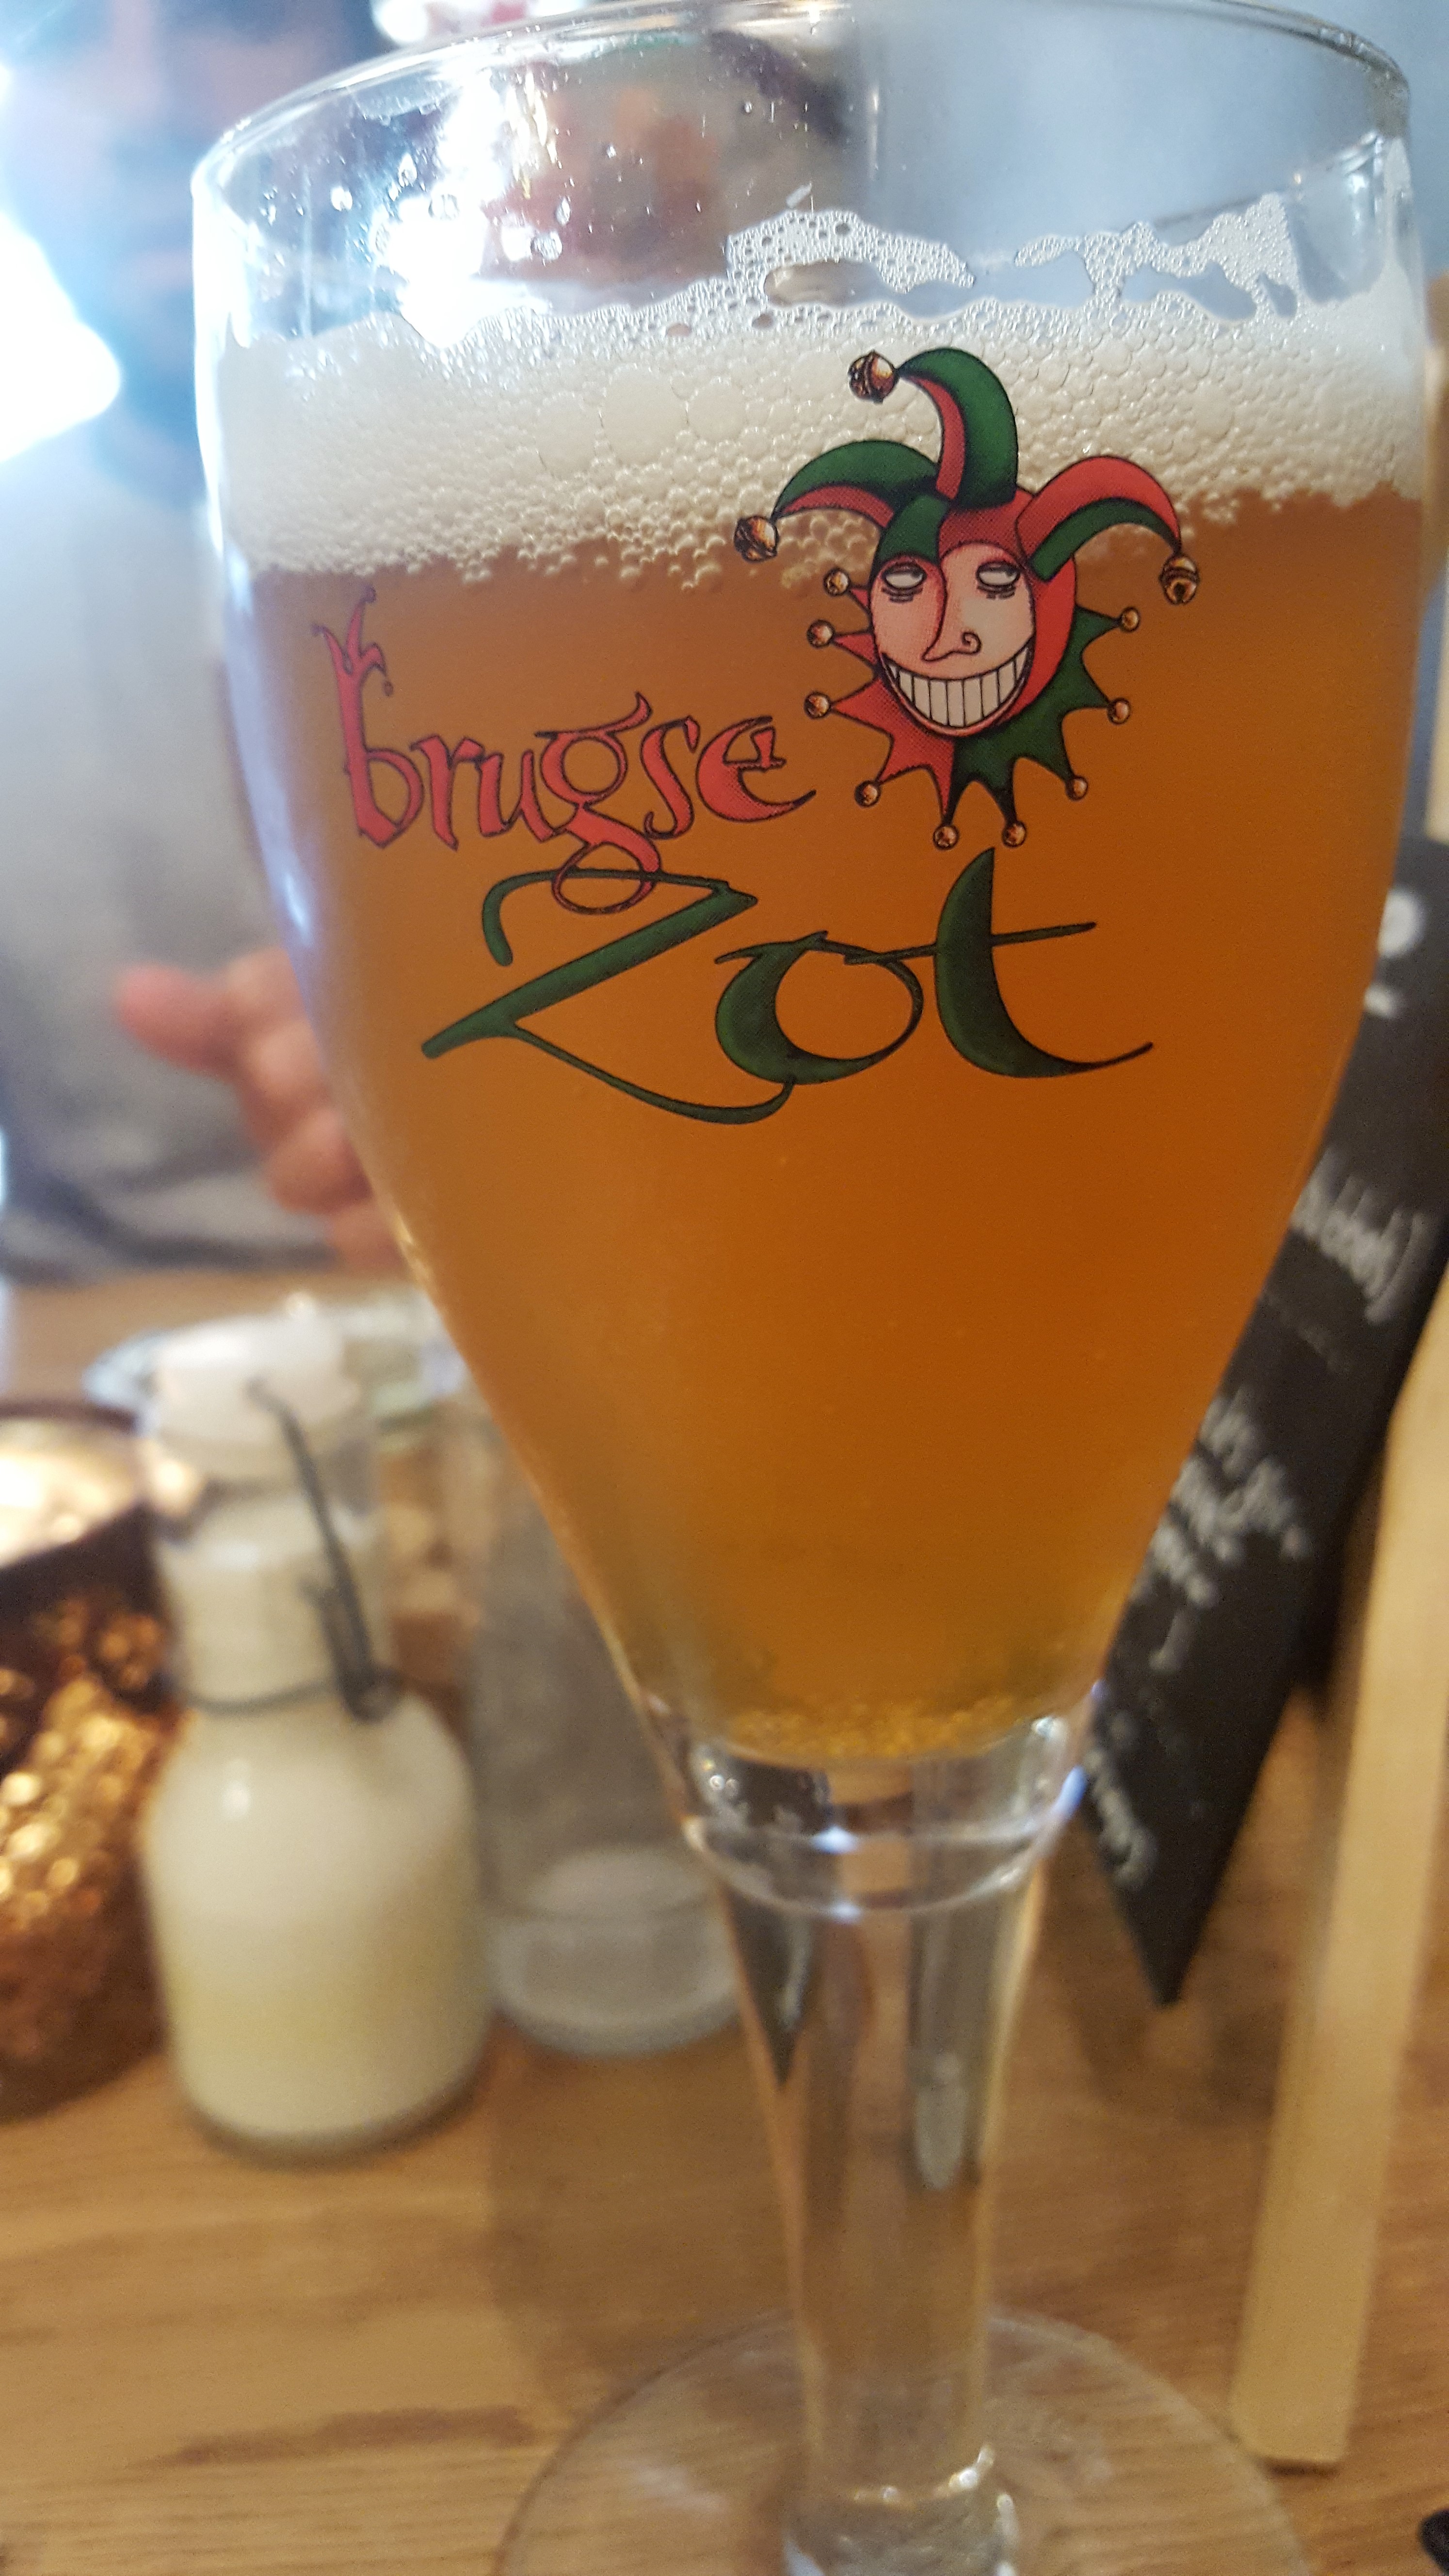 A beer glass that reads Brugse Zot